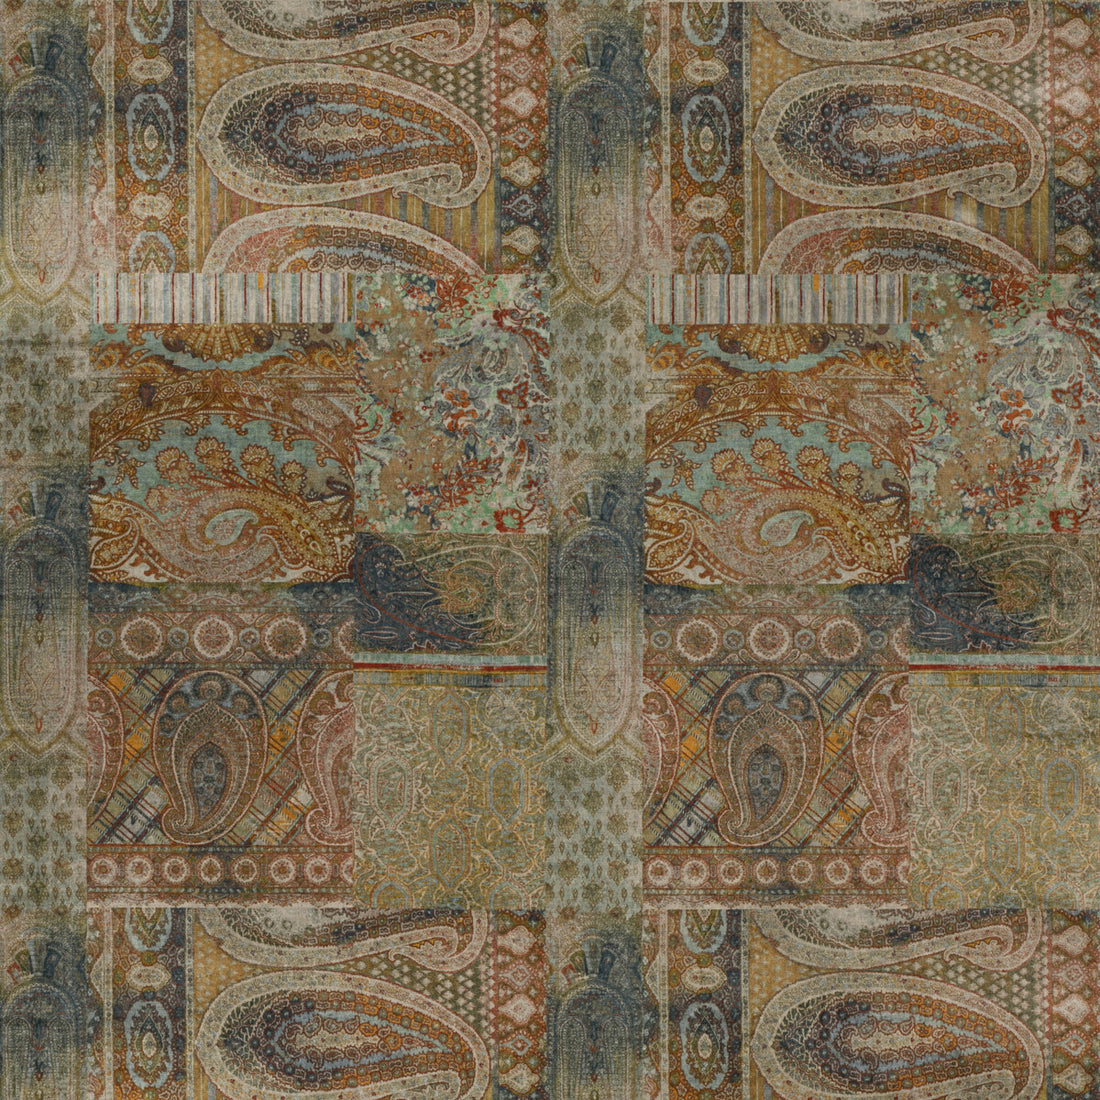 Lomond Velvet fabric in antique color - pattern FD265.J52.0 - by Mulberry in the Icons Fabrics collection